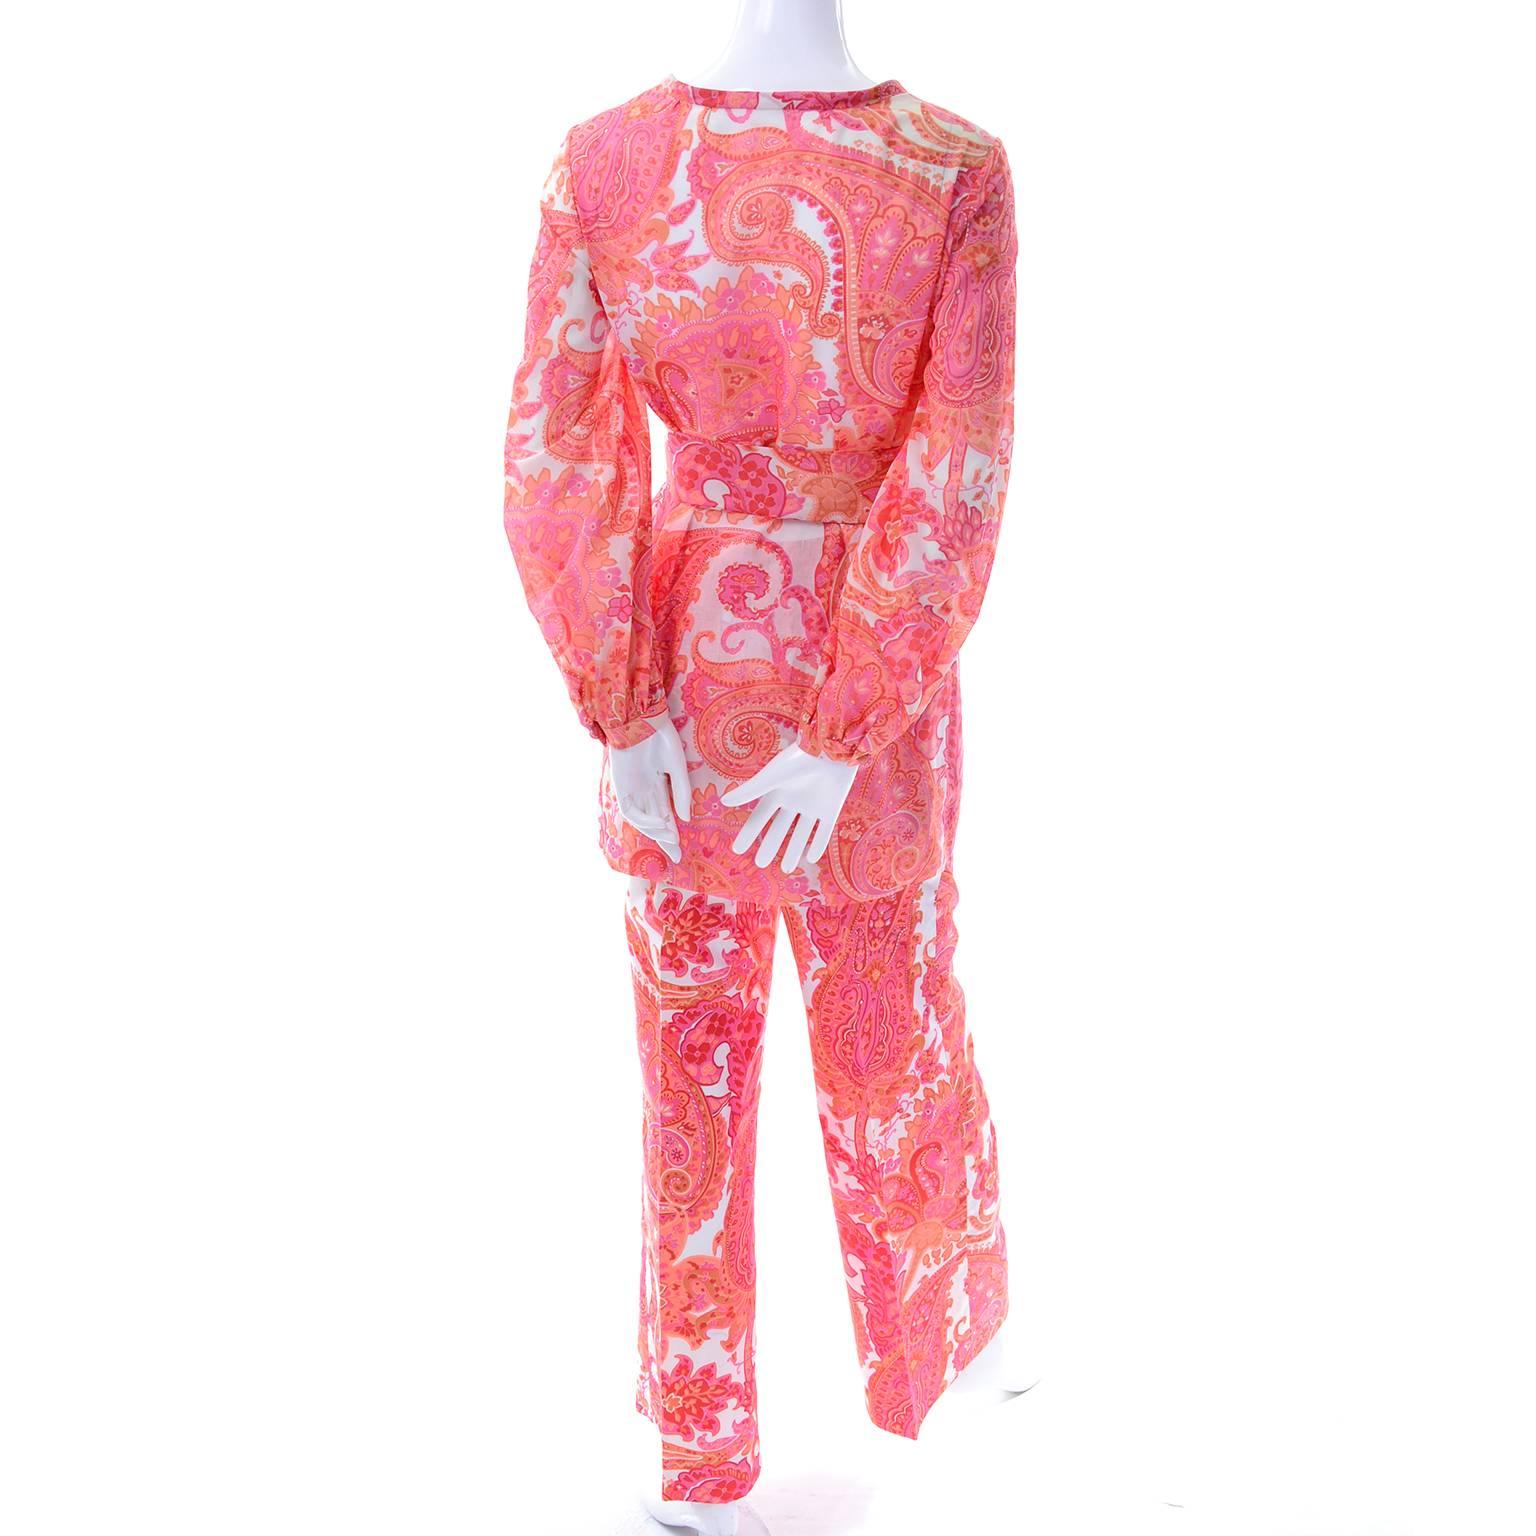 This 2 piece orange and pink paisley pants and tunic ensemble is another one that came from our favorite estate of all time. The outfit only has a small size label, but all of the clothing and accessories from this estate were from important